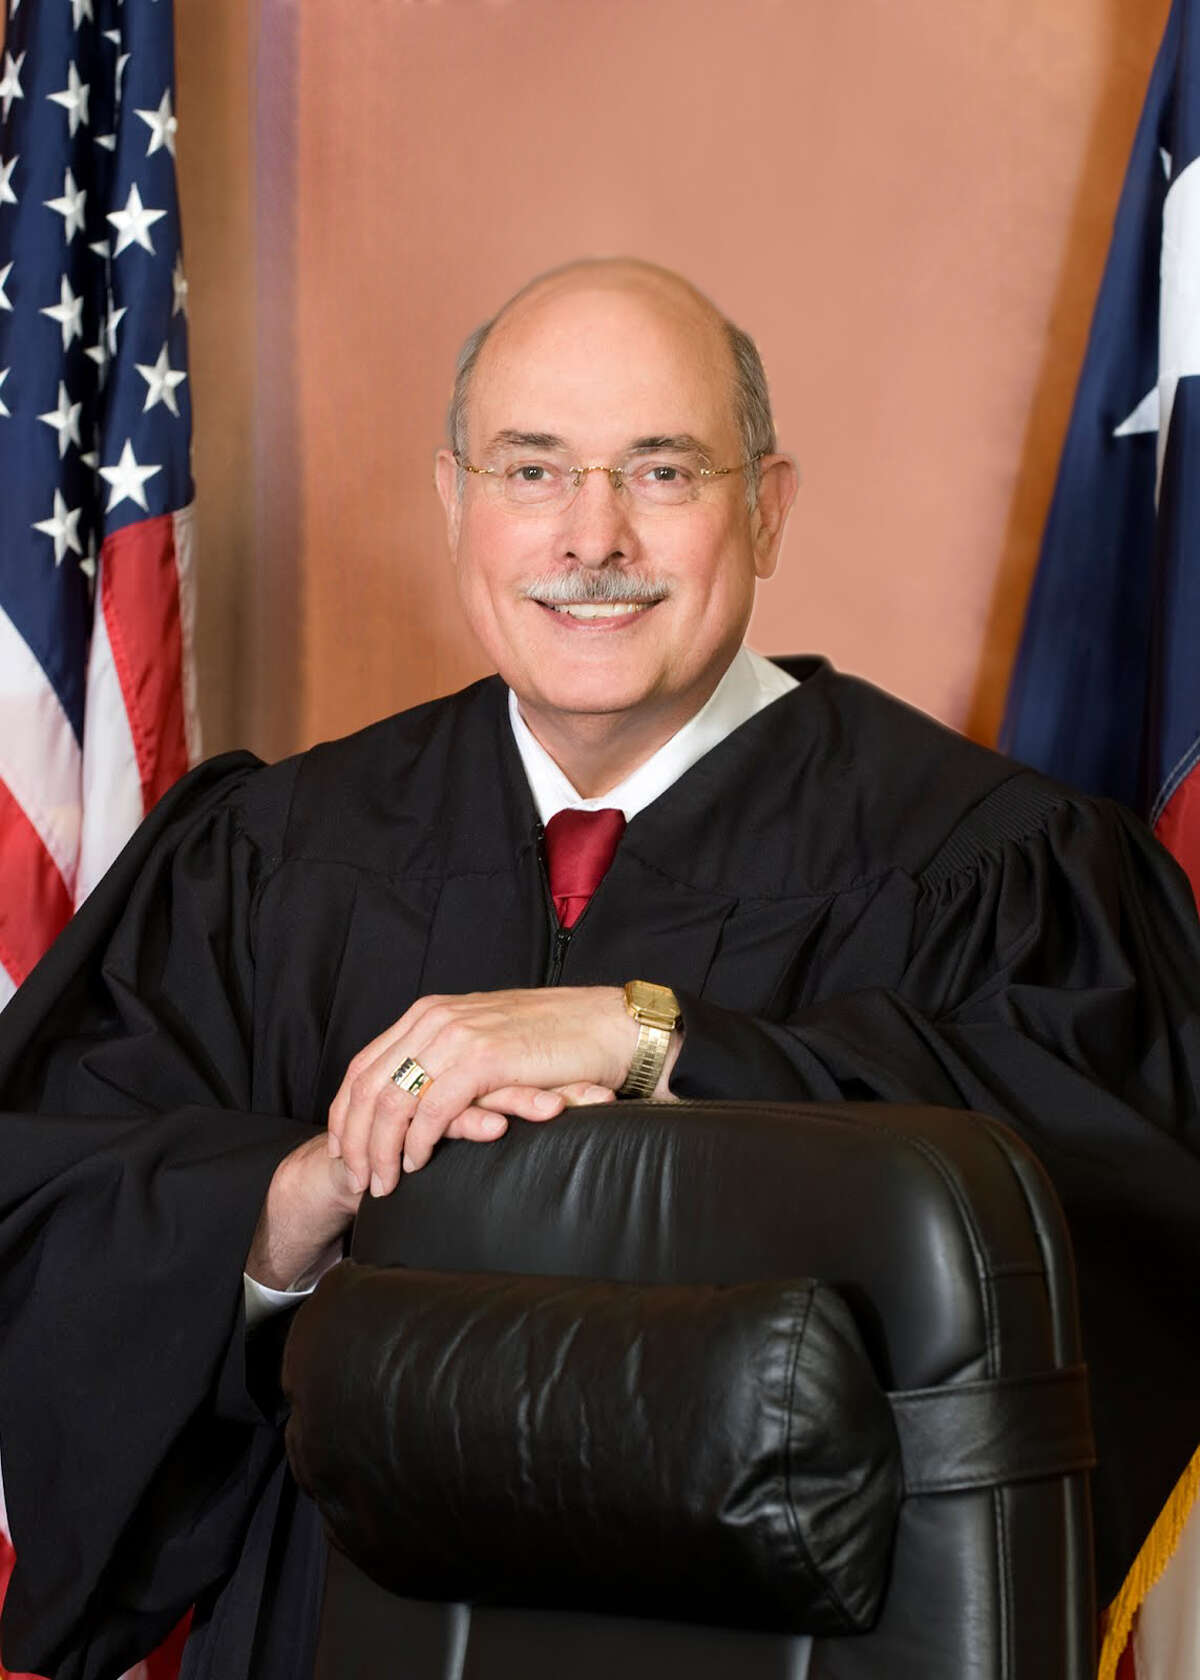 Herb Richie of the 337th District Court was one of the three active Harris County judges admonished.